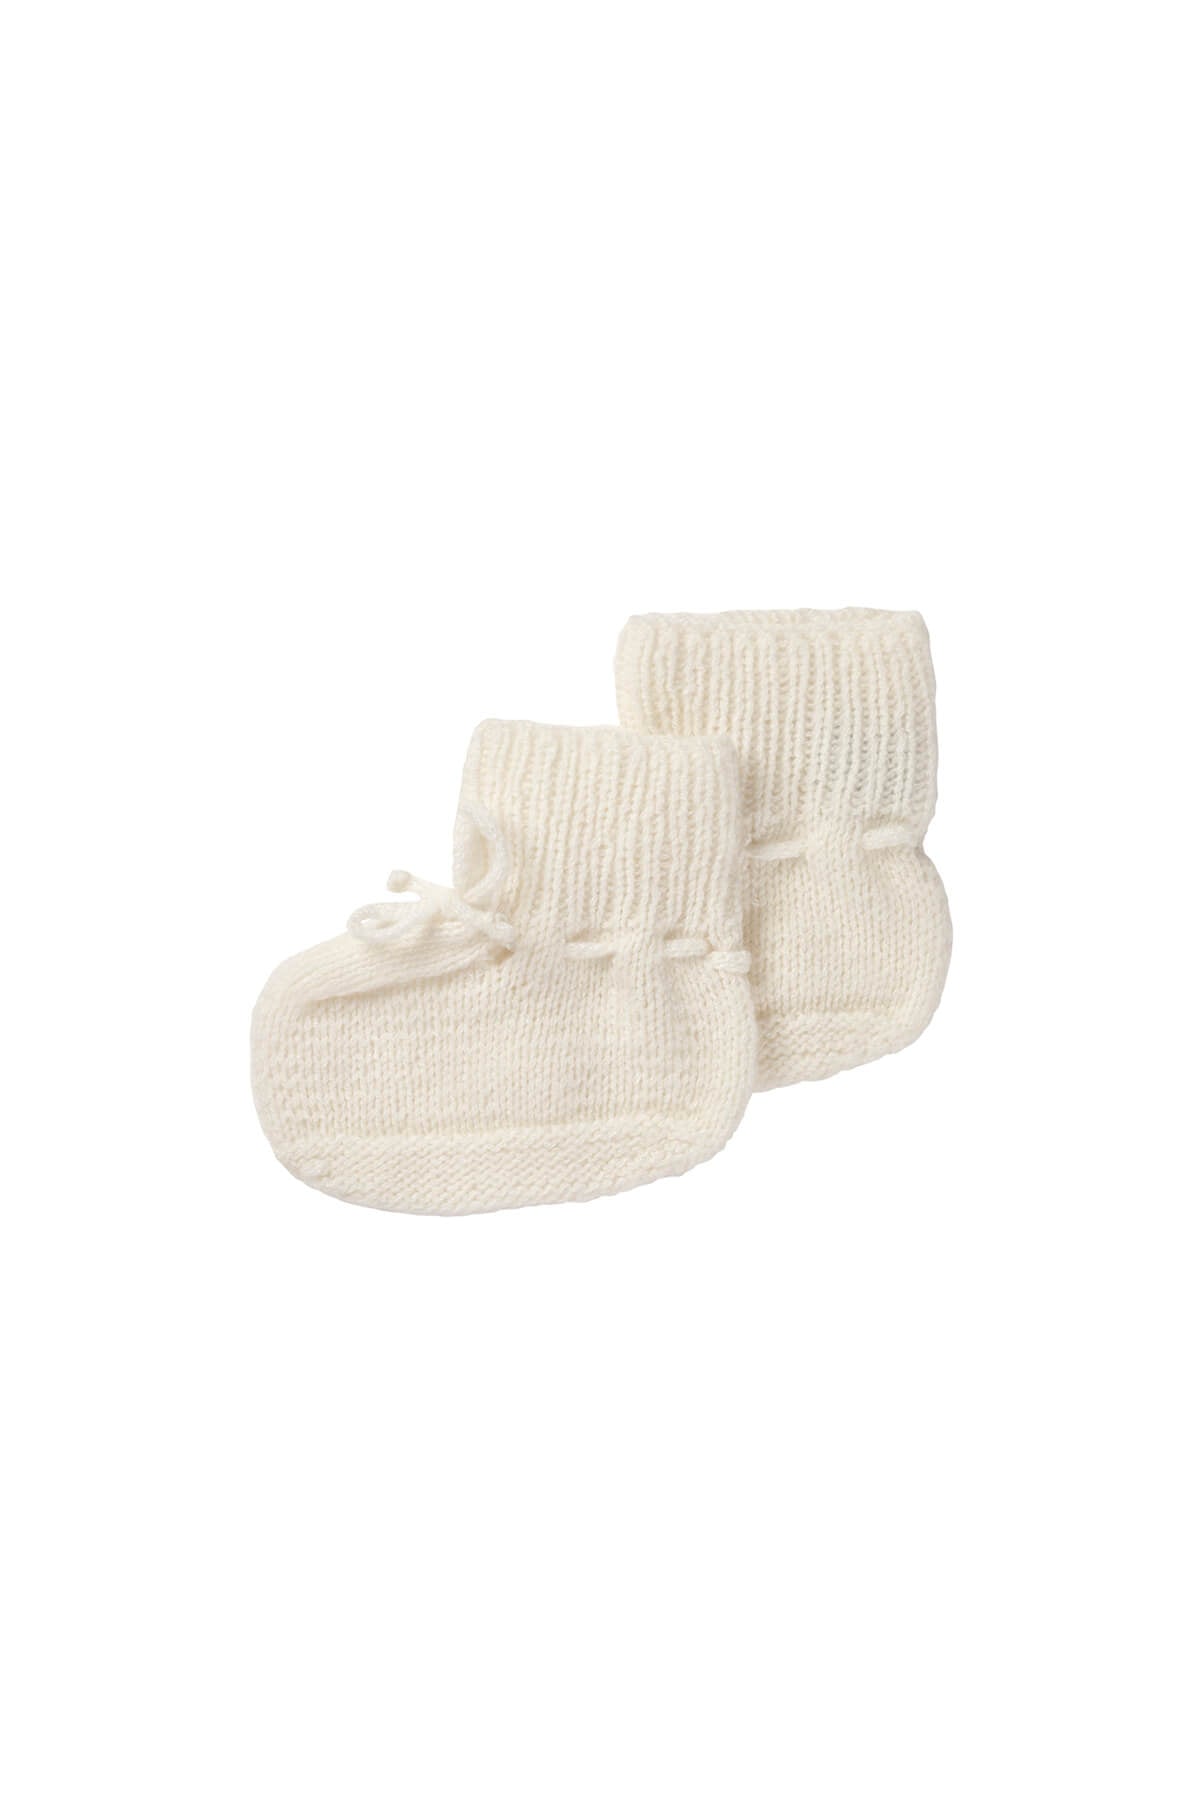 Johnstons of Elgin’s Baby's 1st Cashmere Accessories Gift Set with White Cashmere Baby Booties on a white background AW21GIFTSET20A